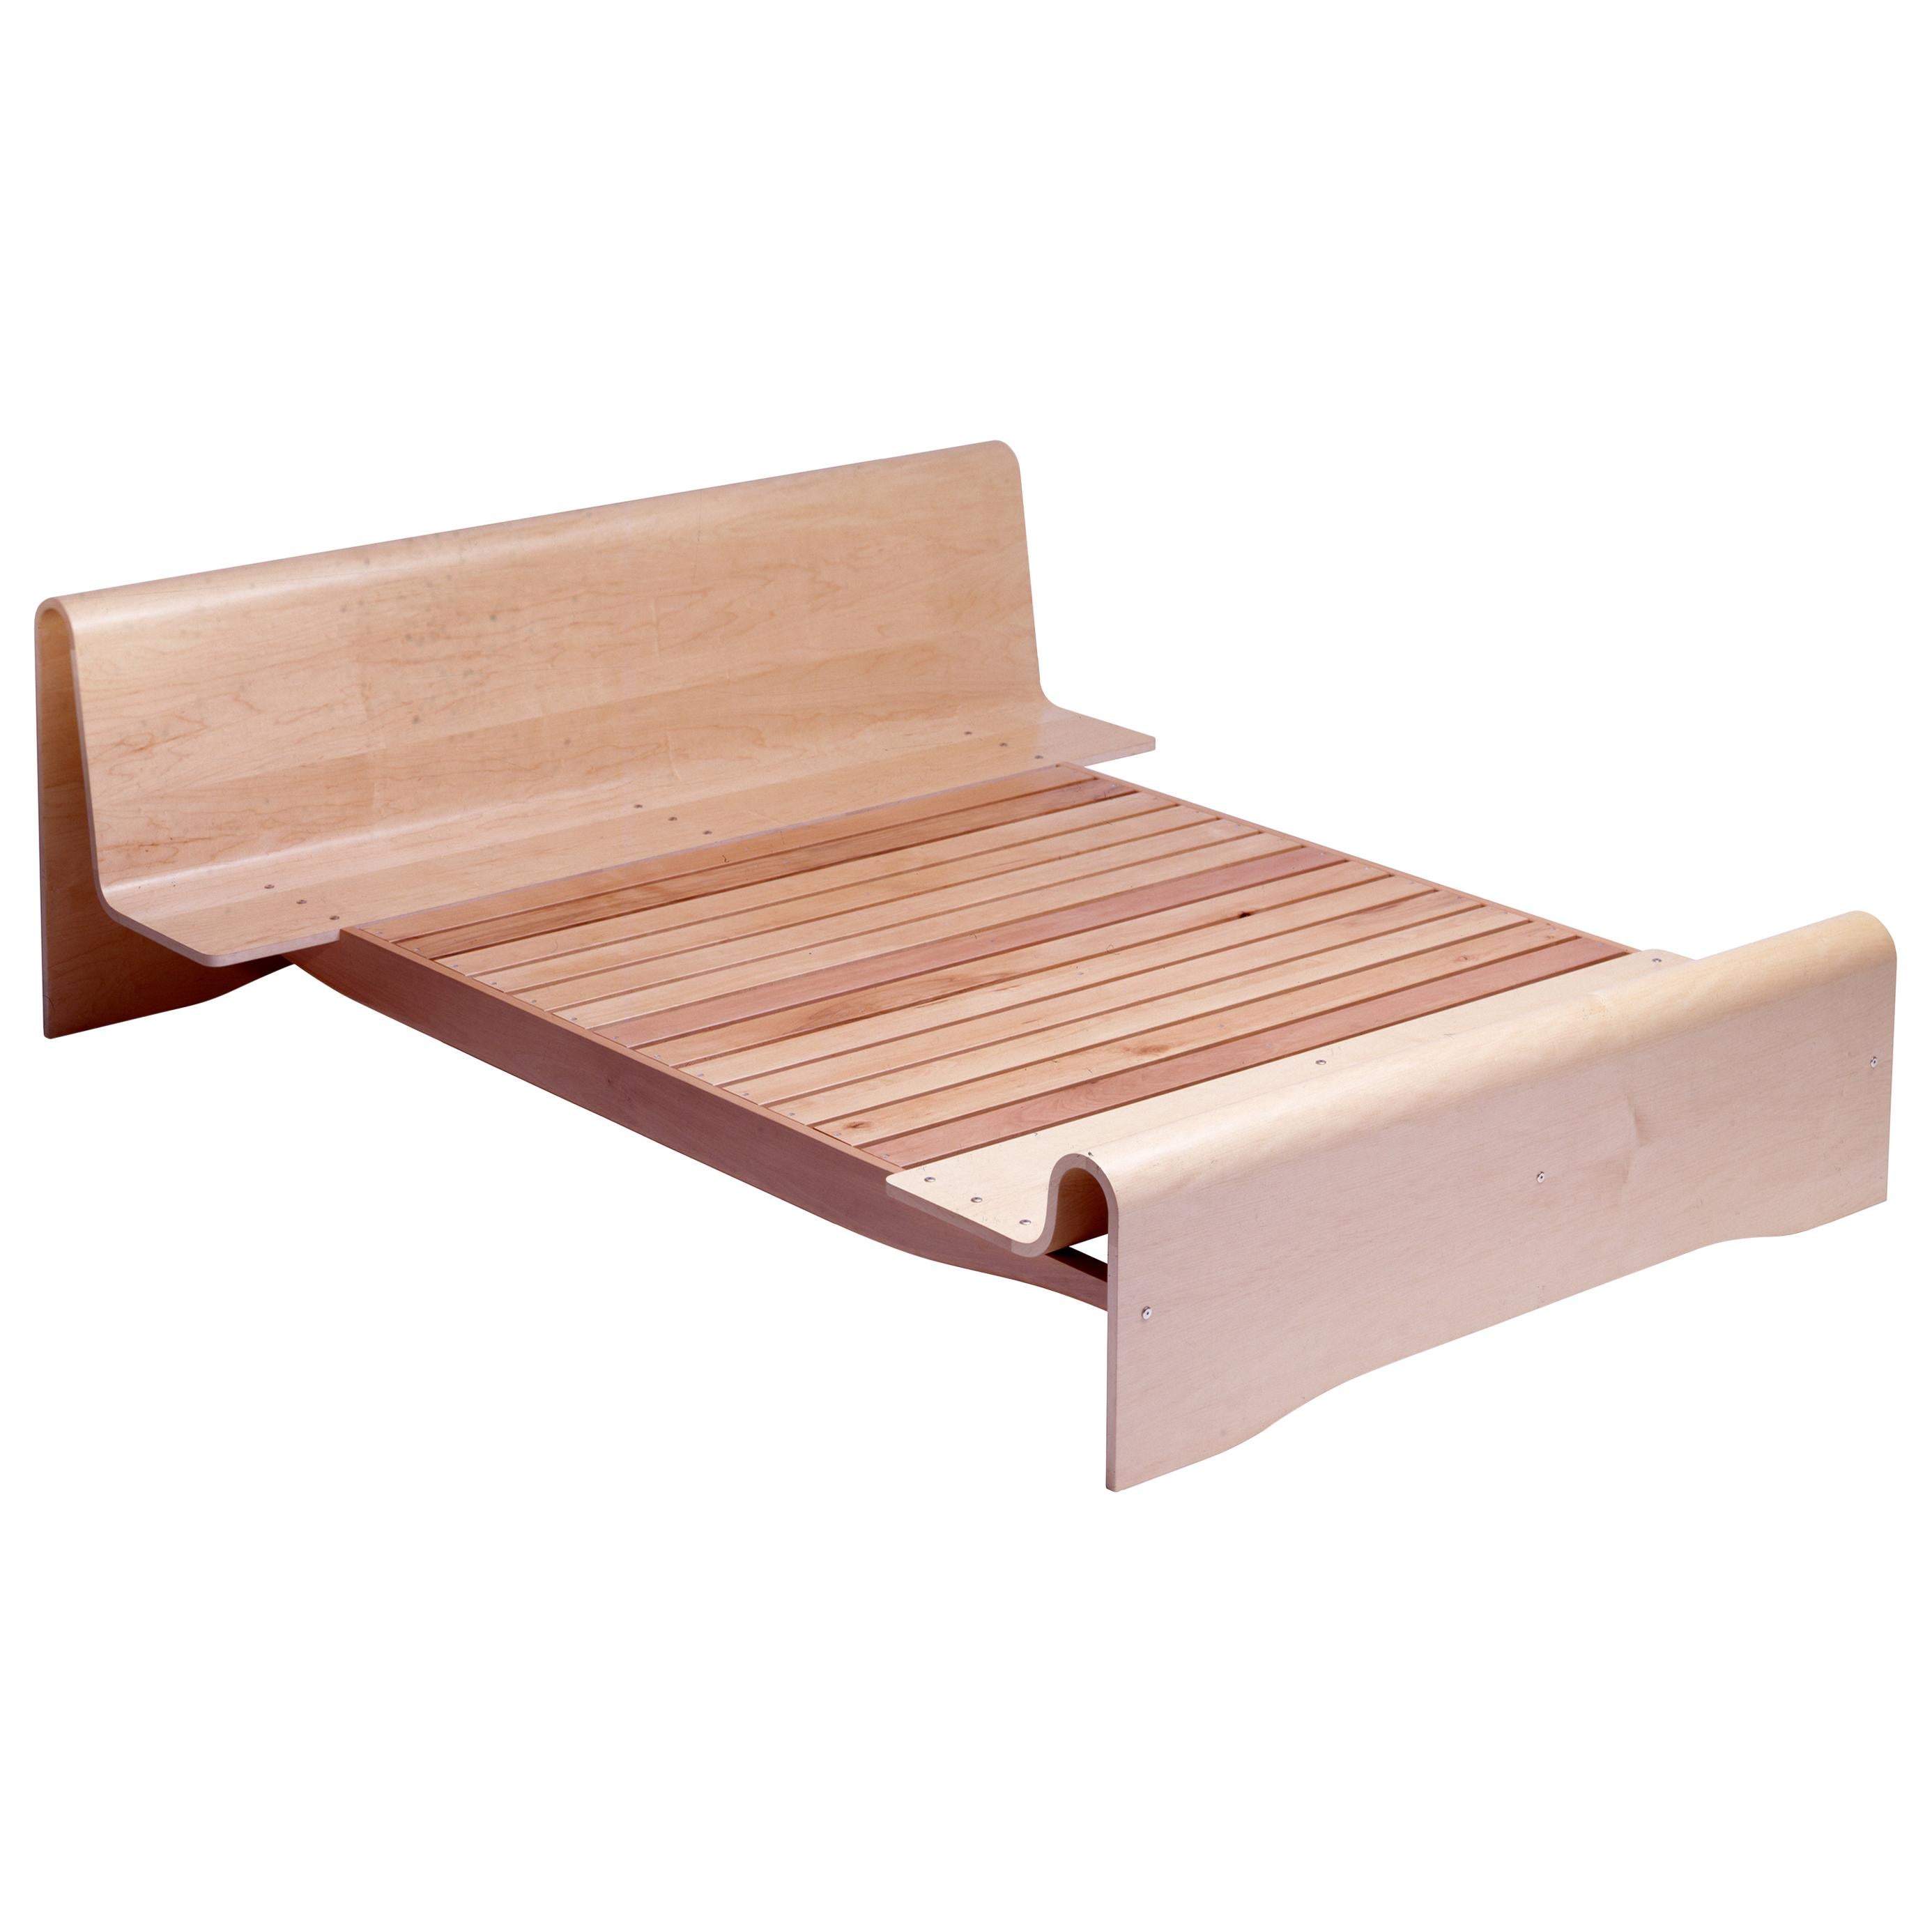 Bespoke Lovegrove Birch Beds Collection For Sale